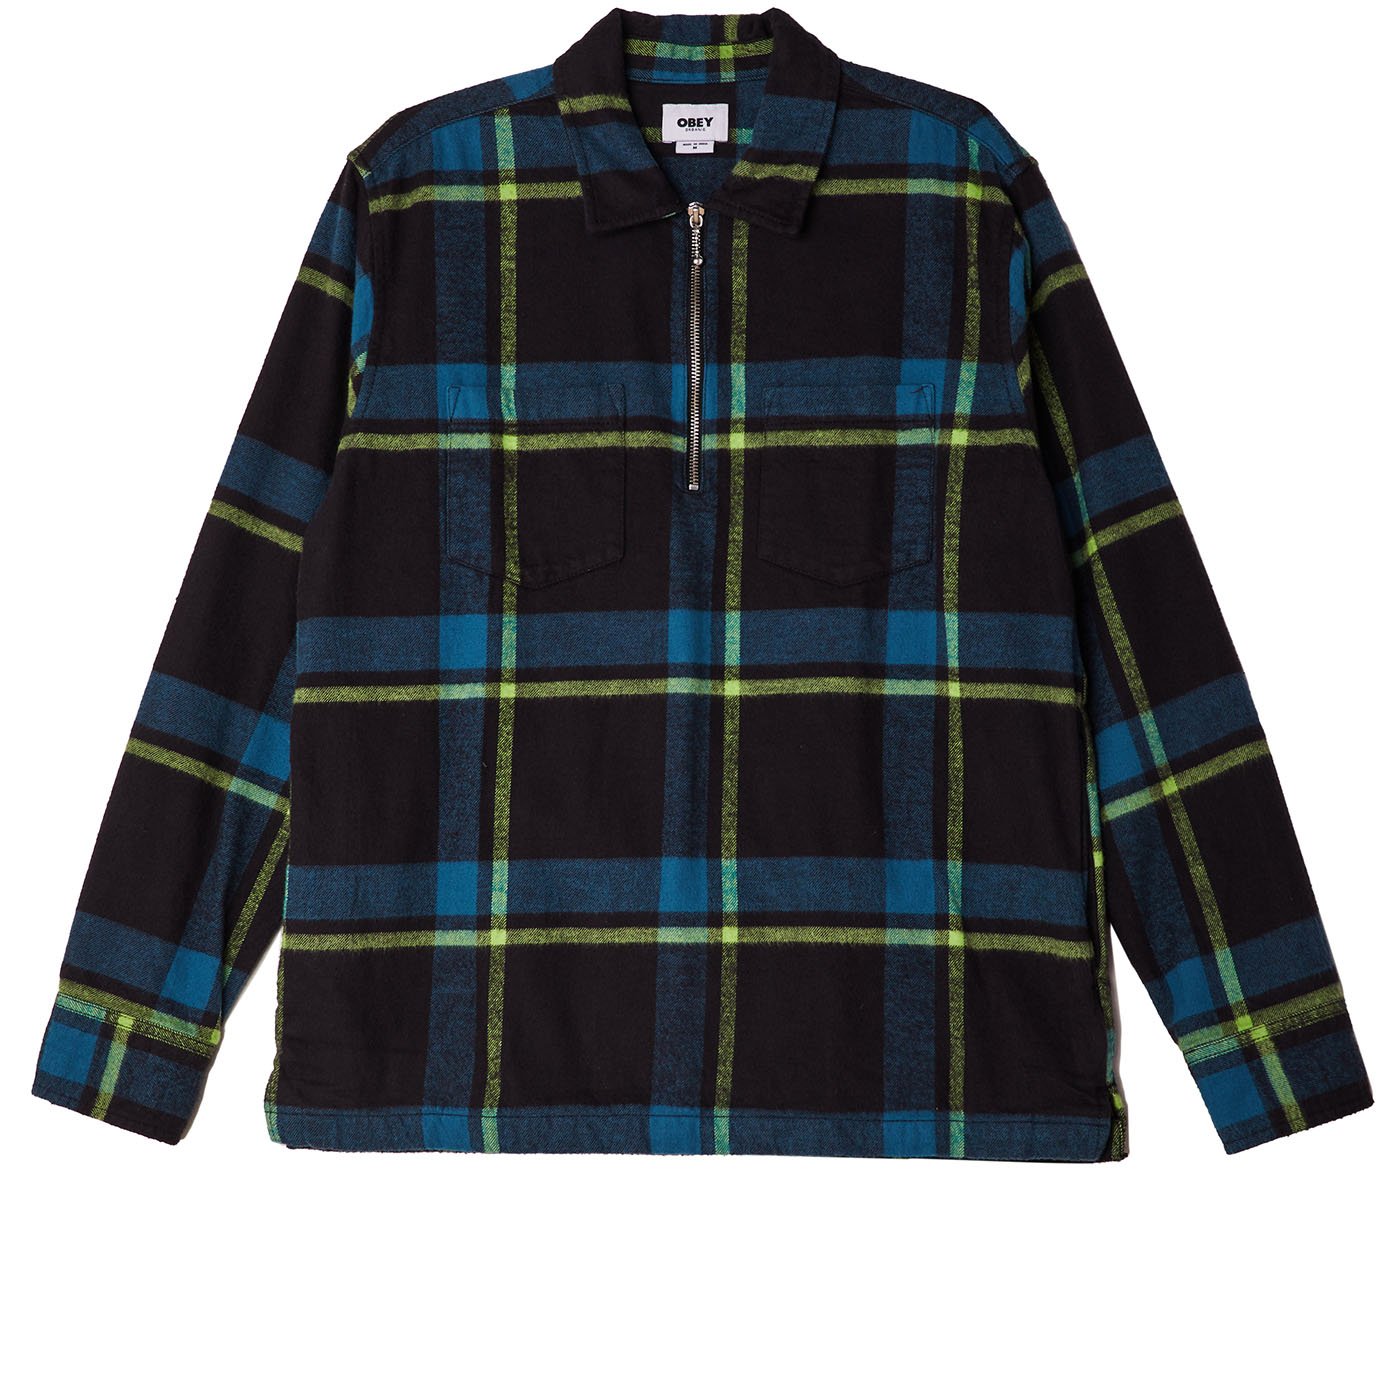 OBEY Pursuits Woven Shirt